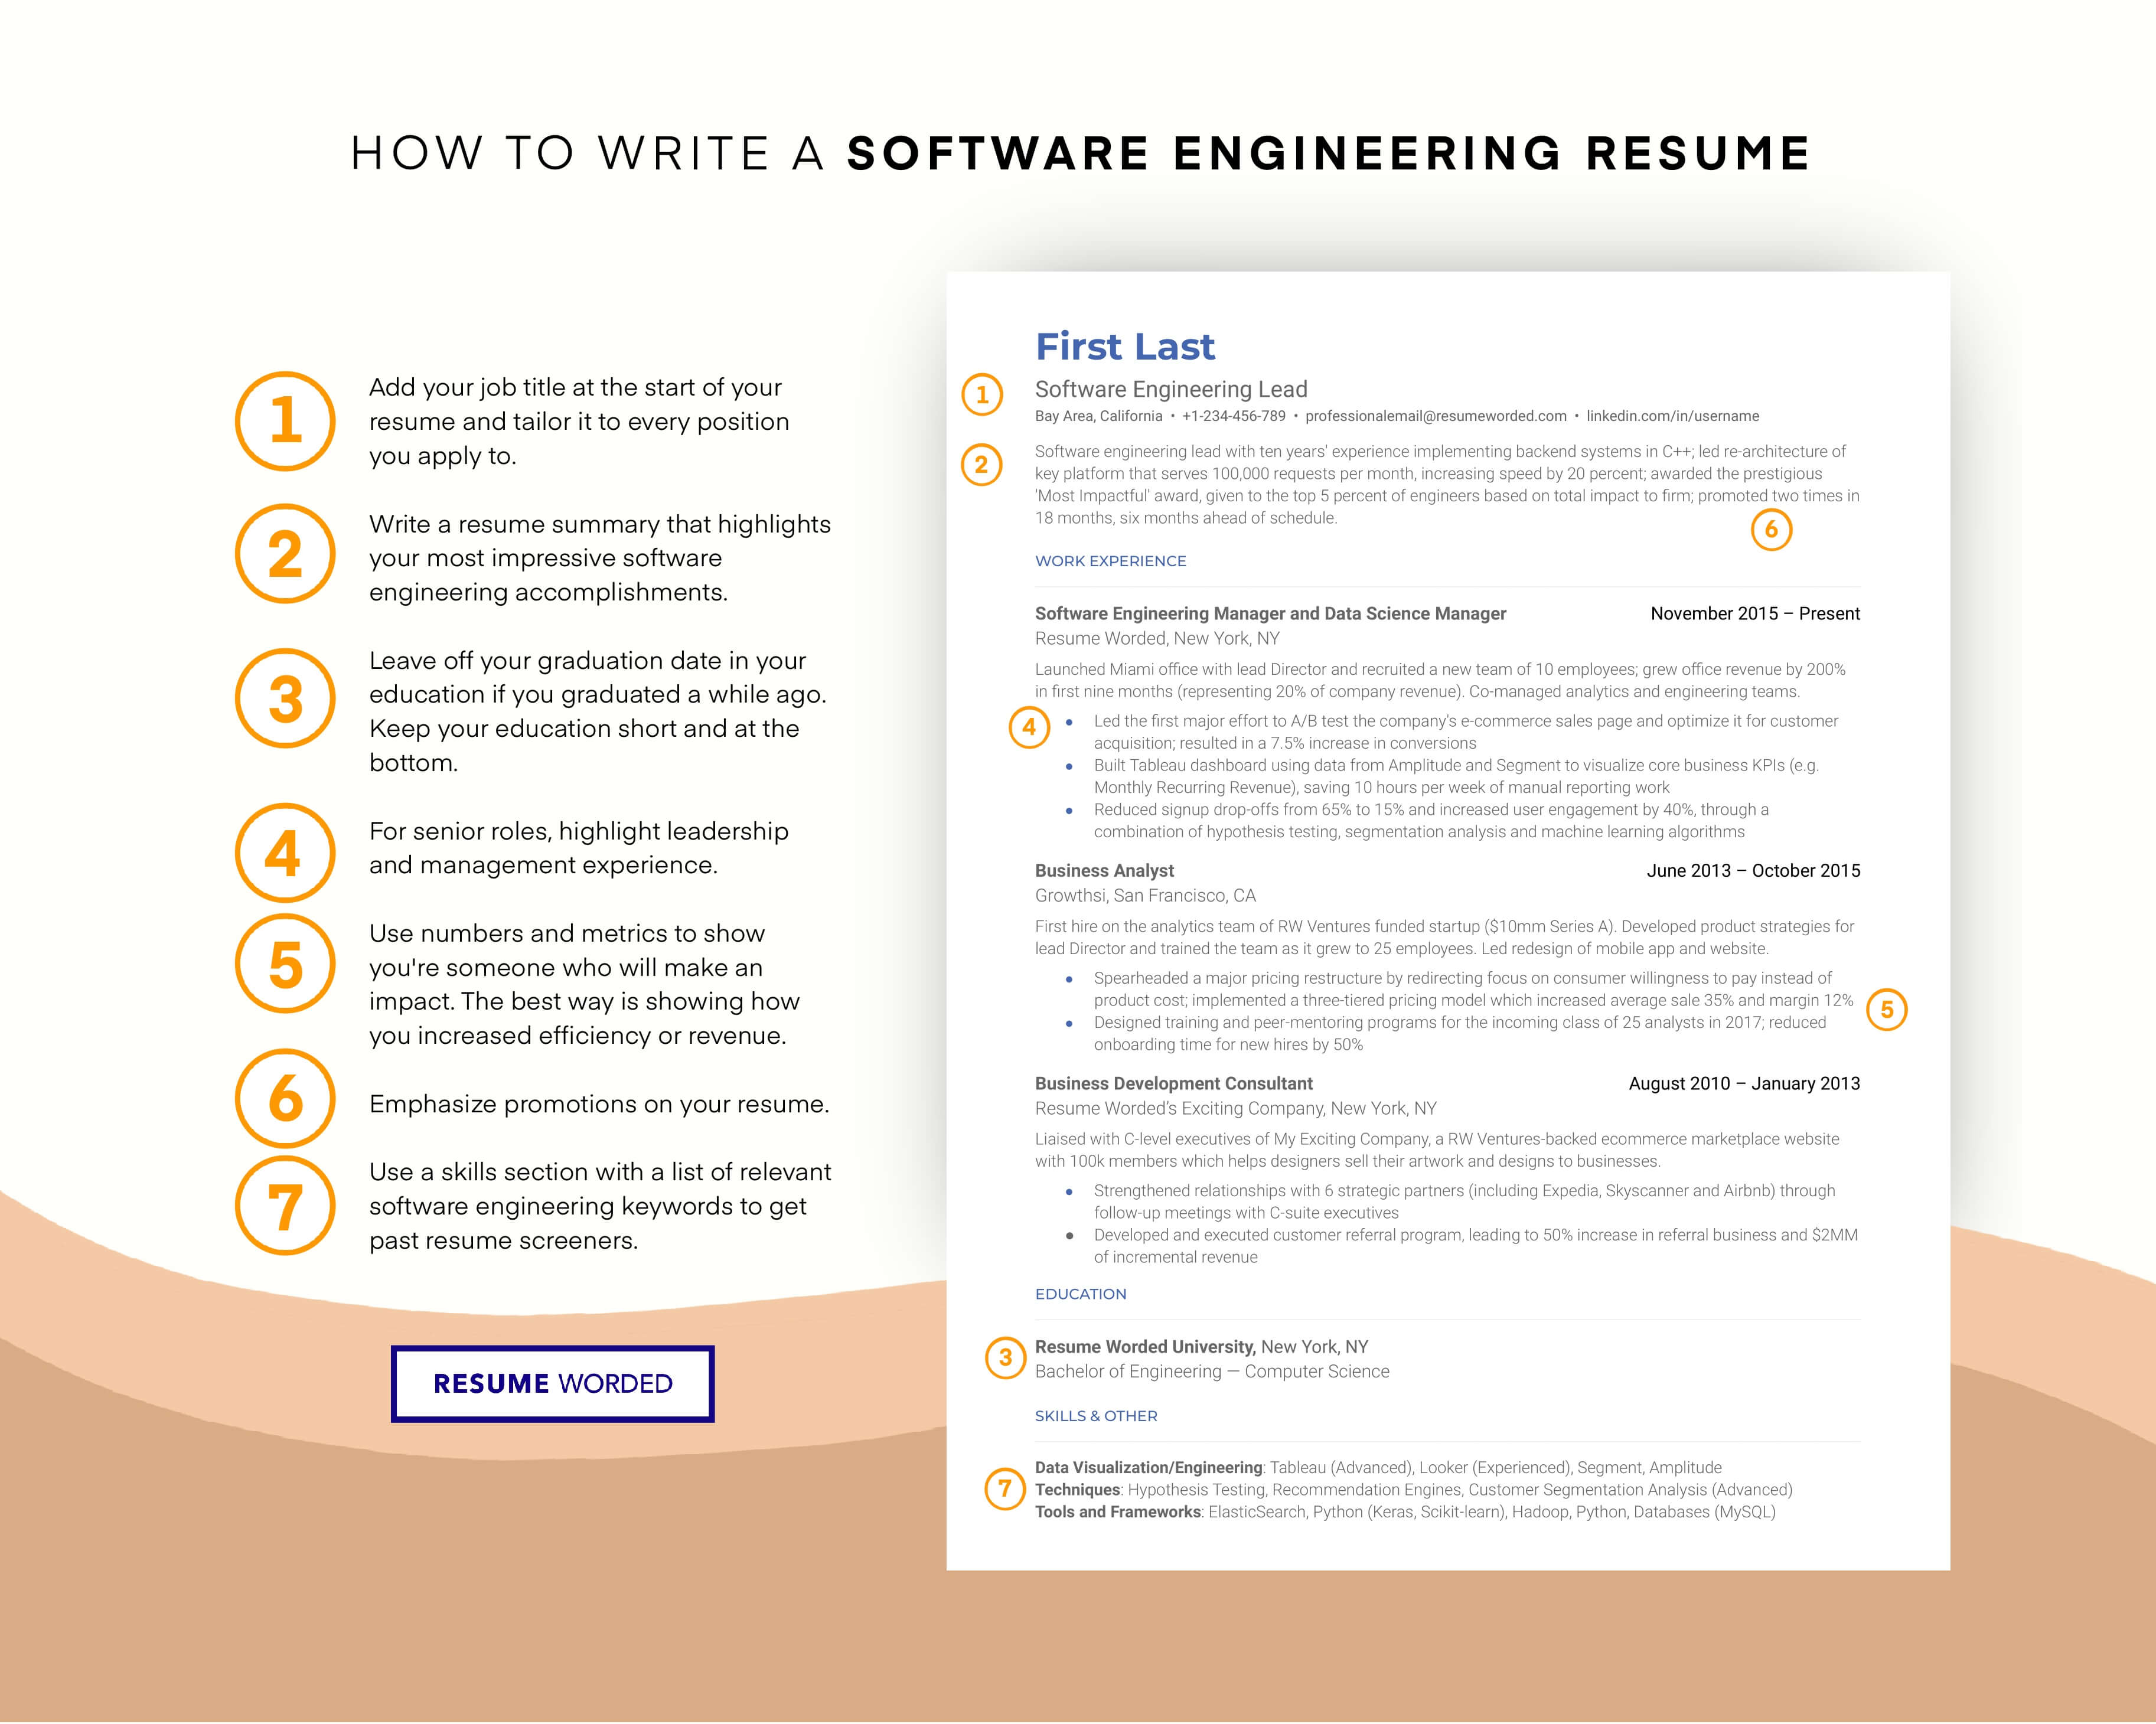 Experience with credentialing software - Credentialing Specialist Resume